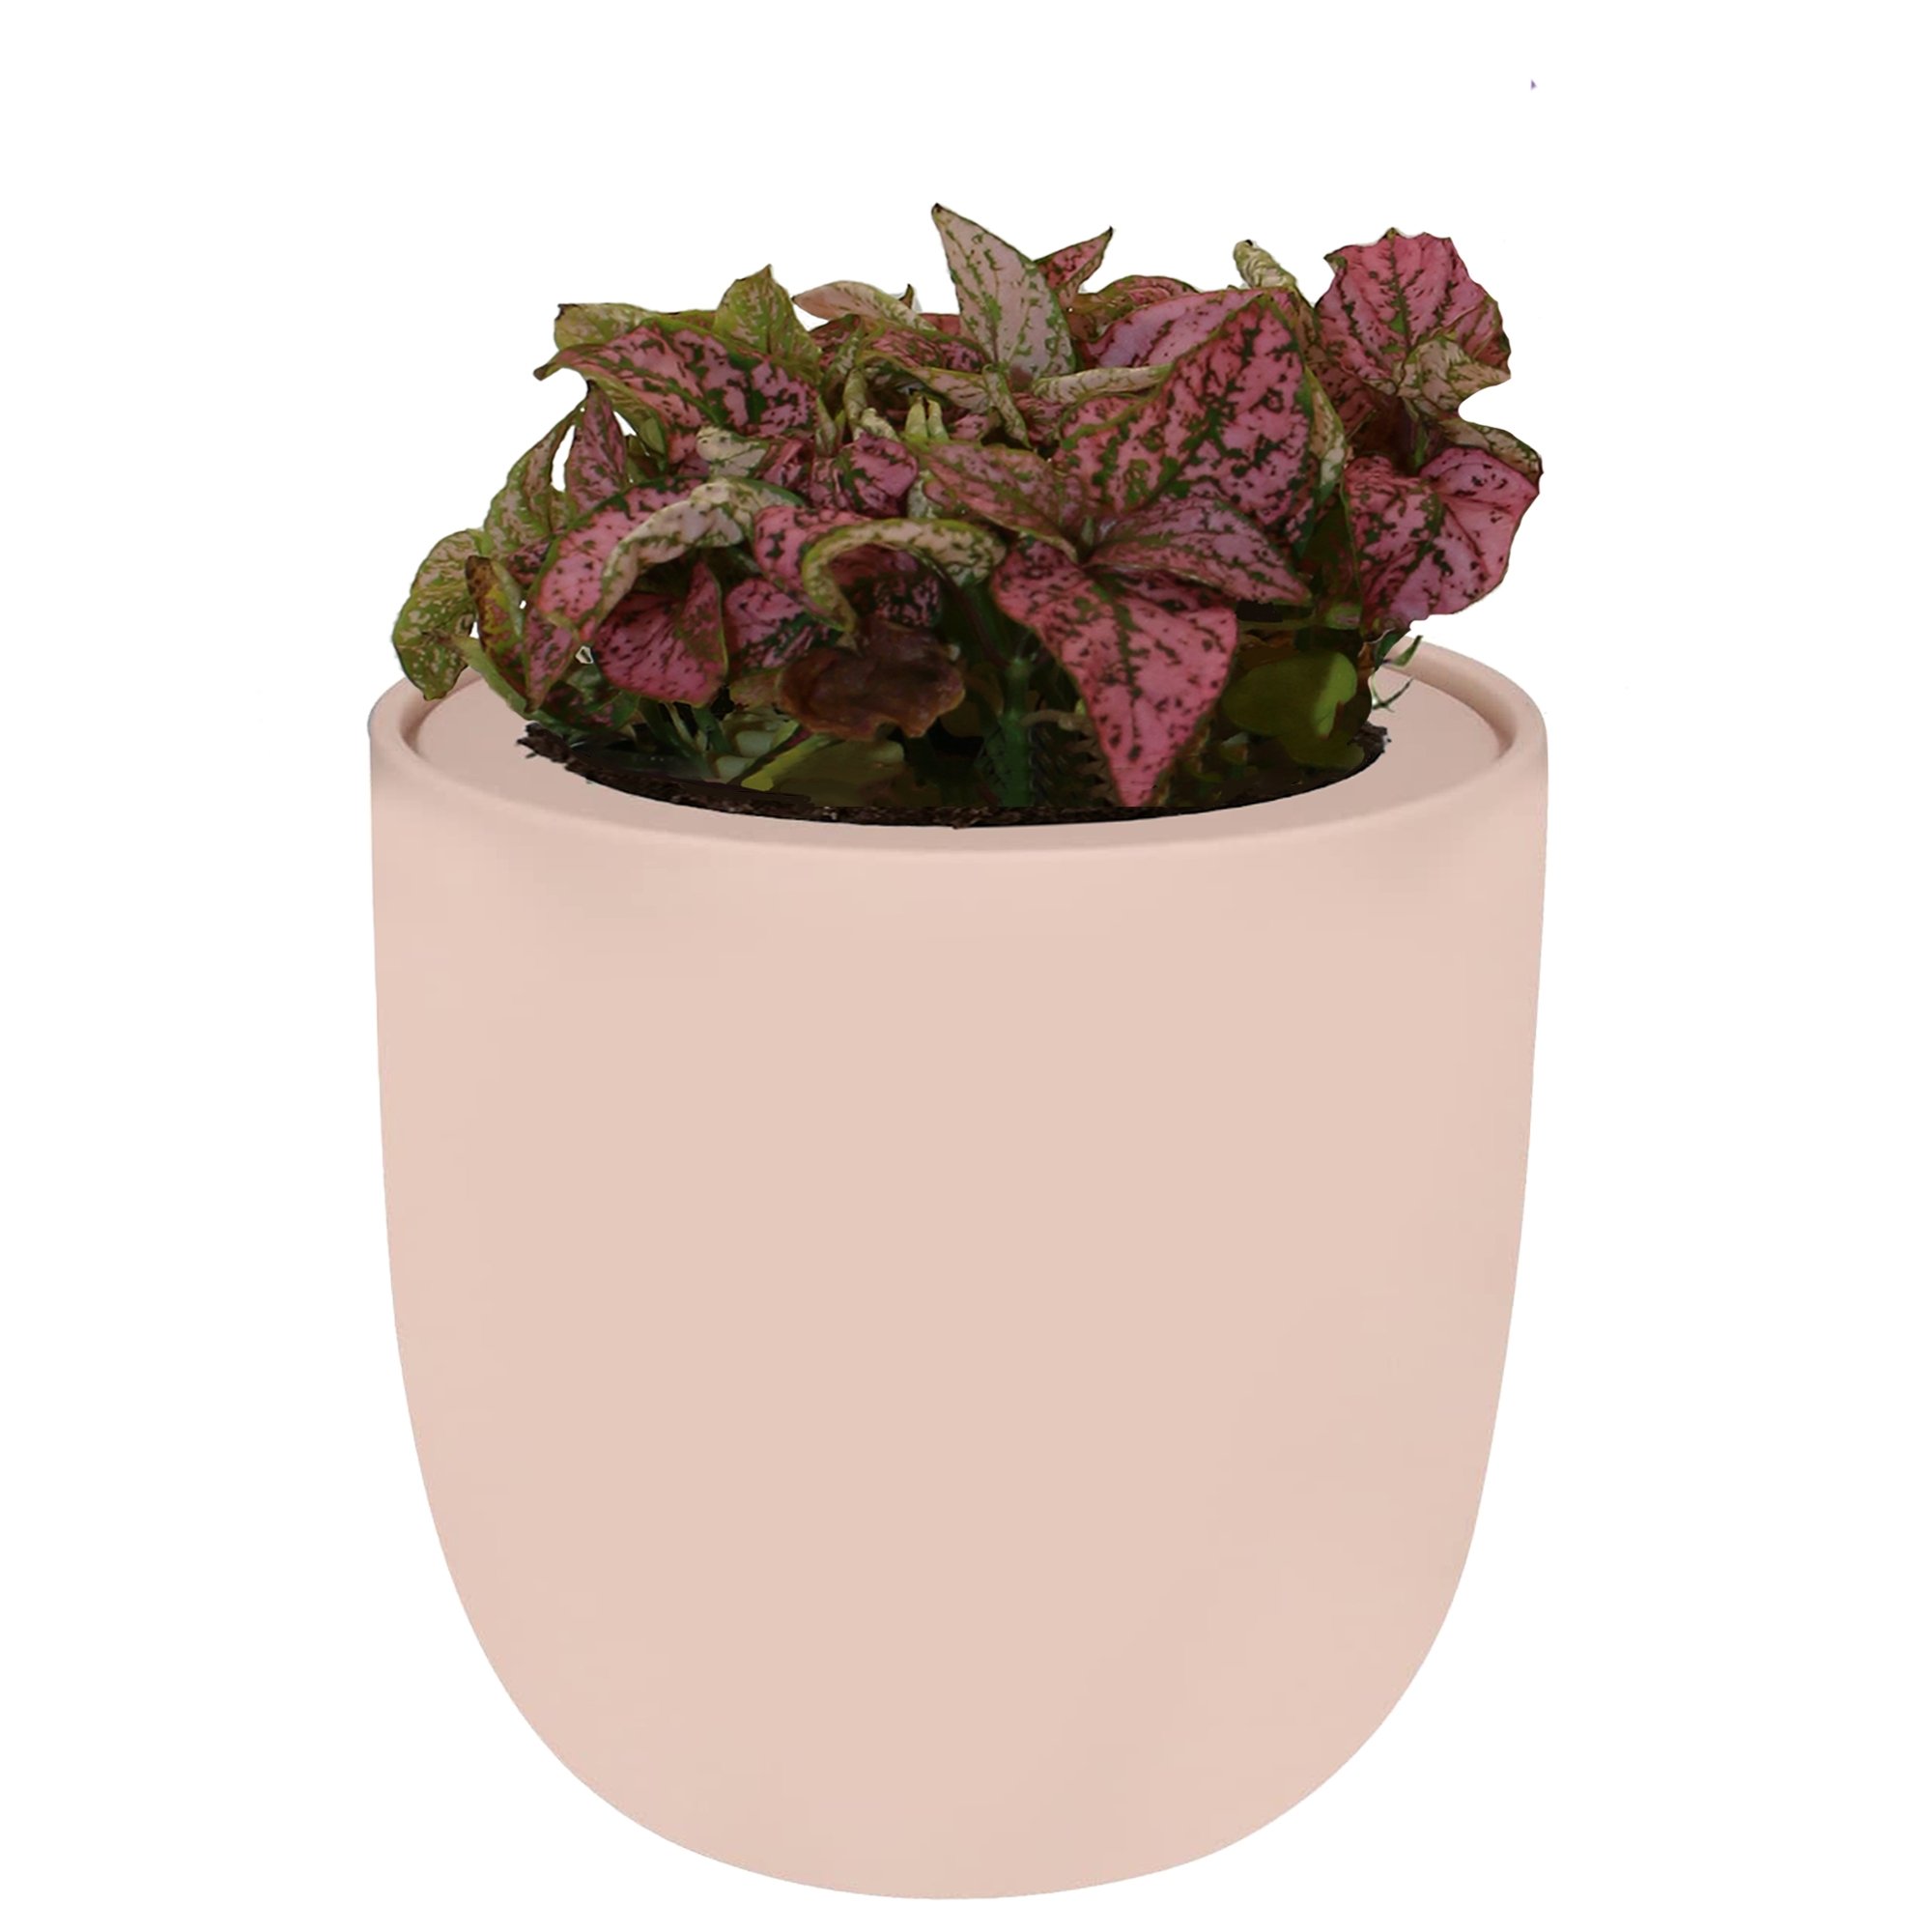 Hydroponic Growing Kit with Pink Ceramic Pot and Seeds (P-Pink Polka Dot Hypoestes)